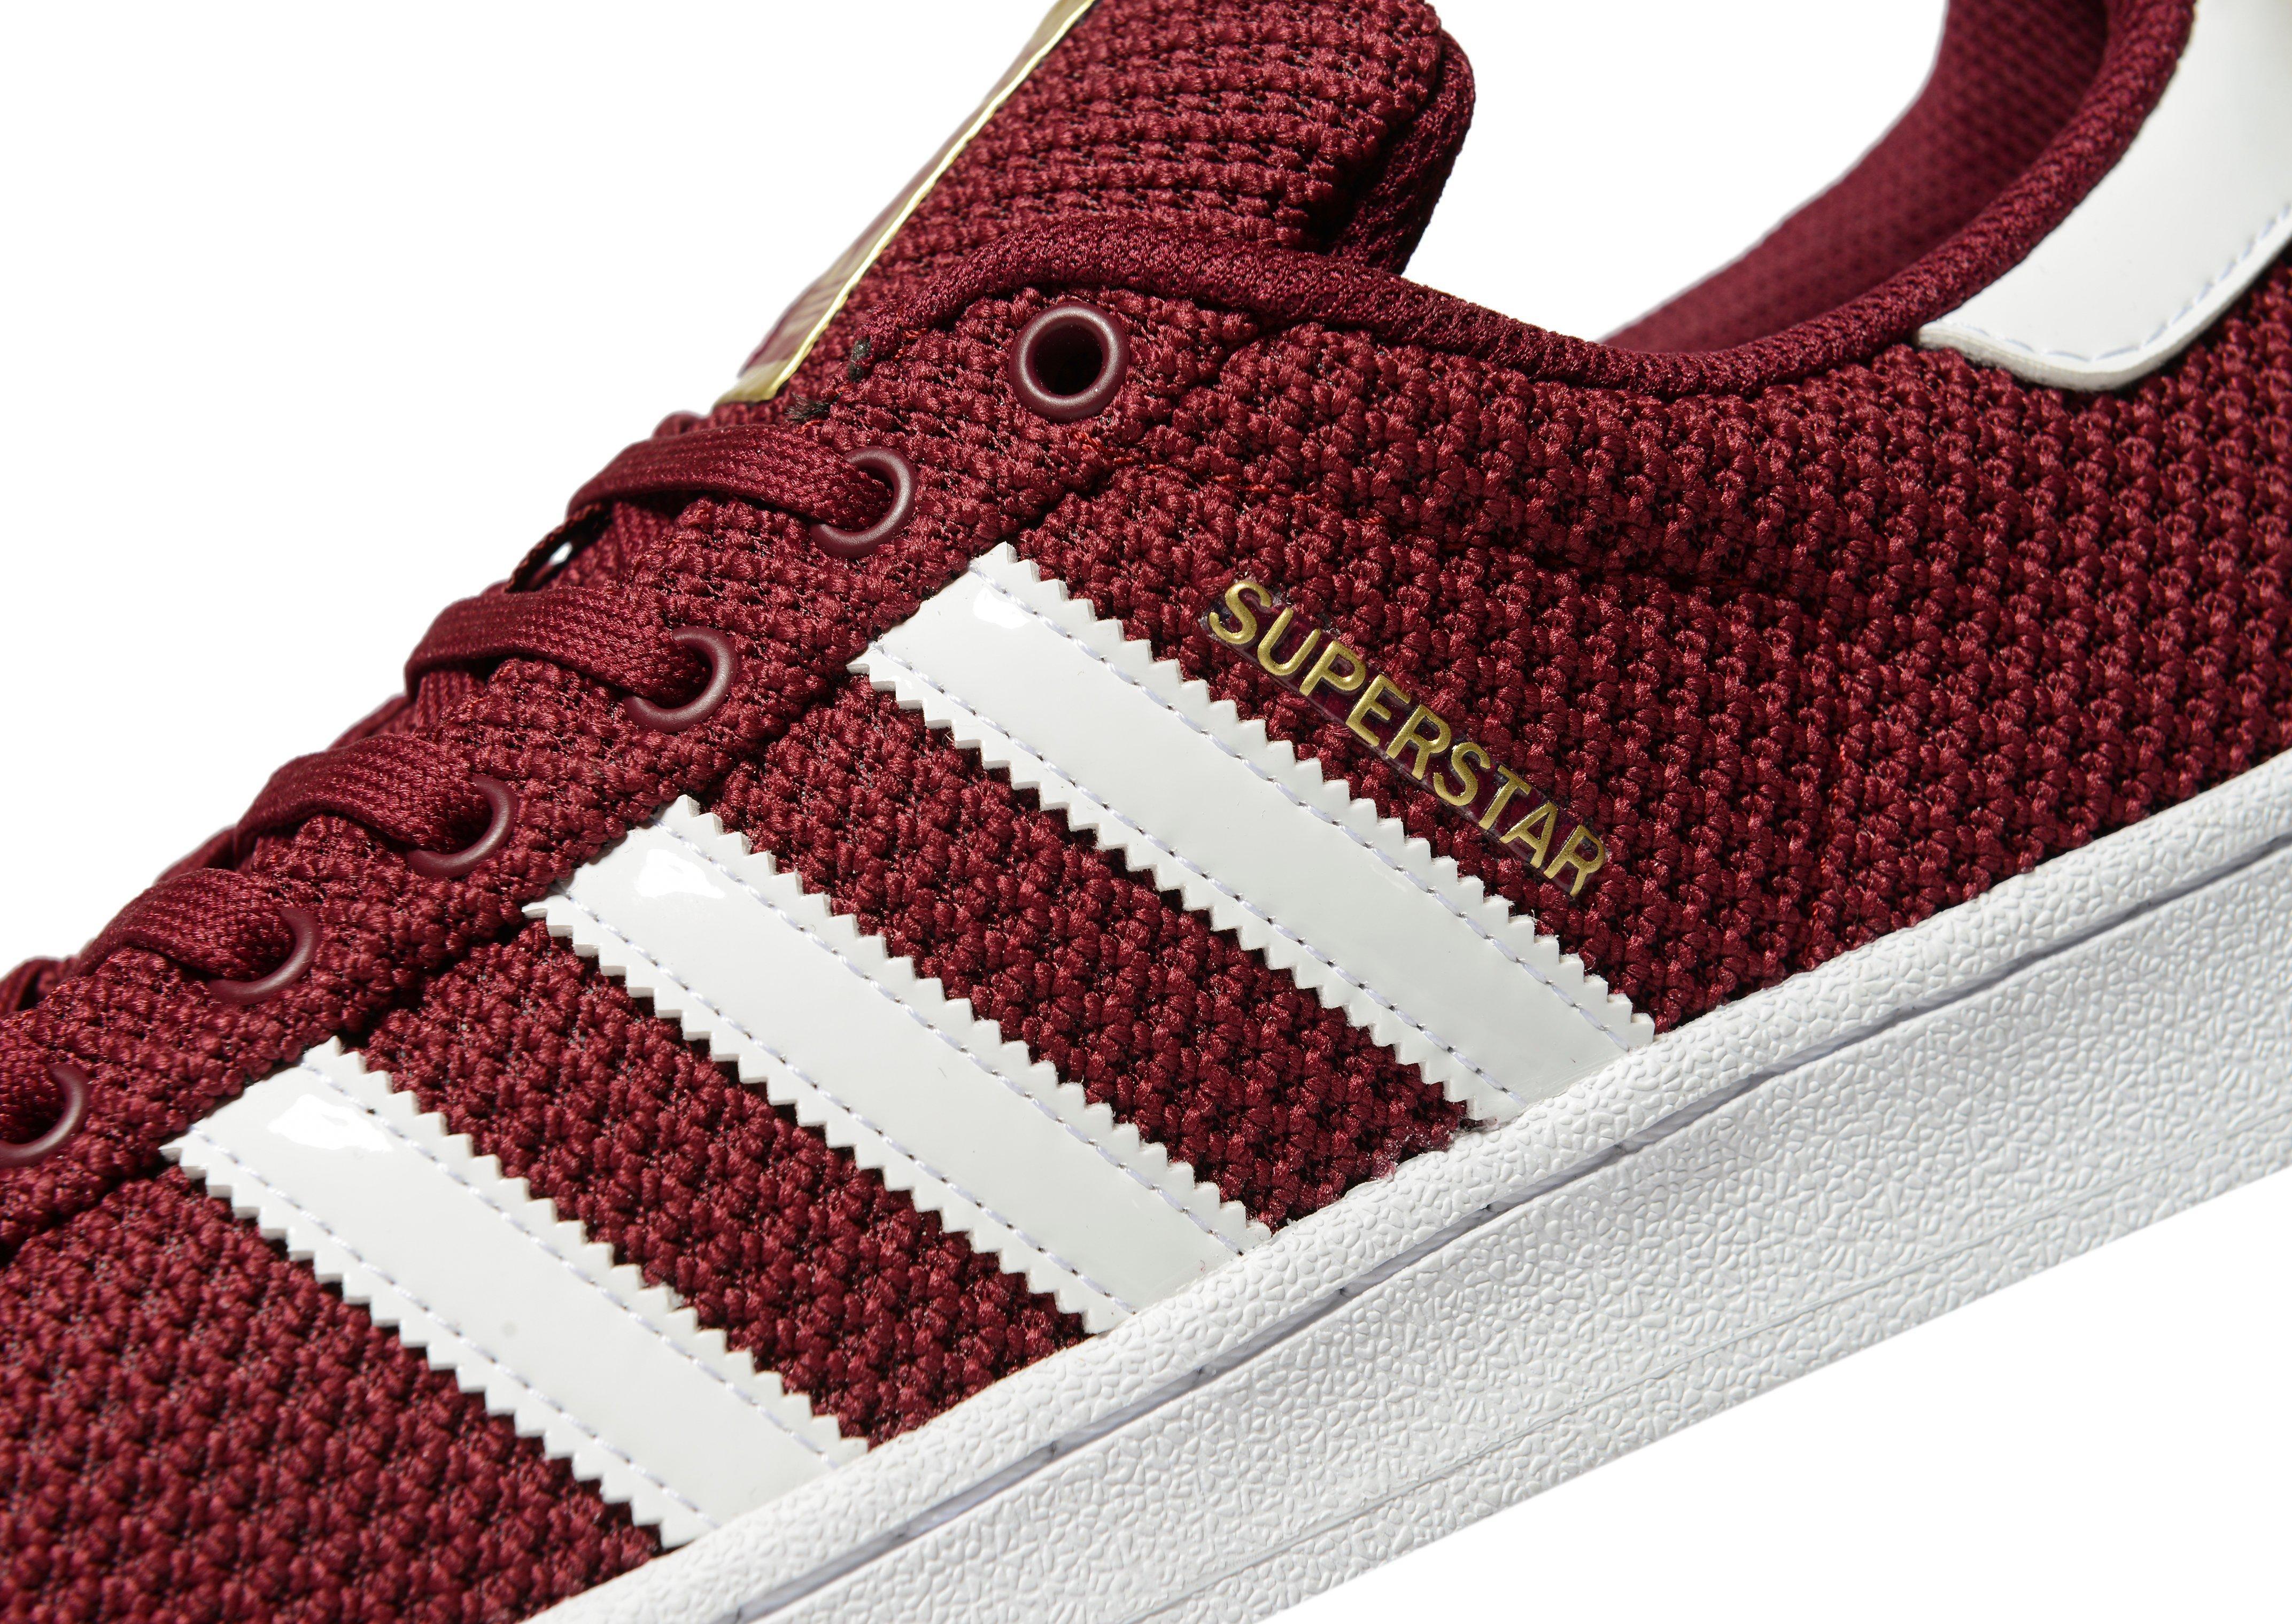 Clancy Roasted Corridor adidas superstar knit red - danvilleelectrician.org